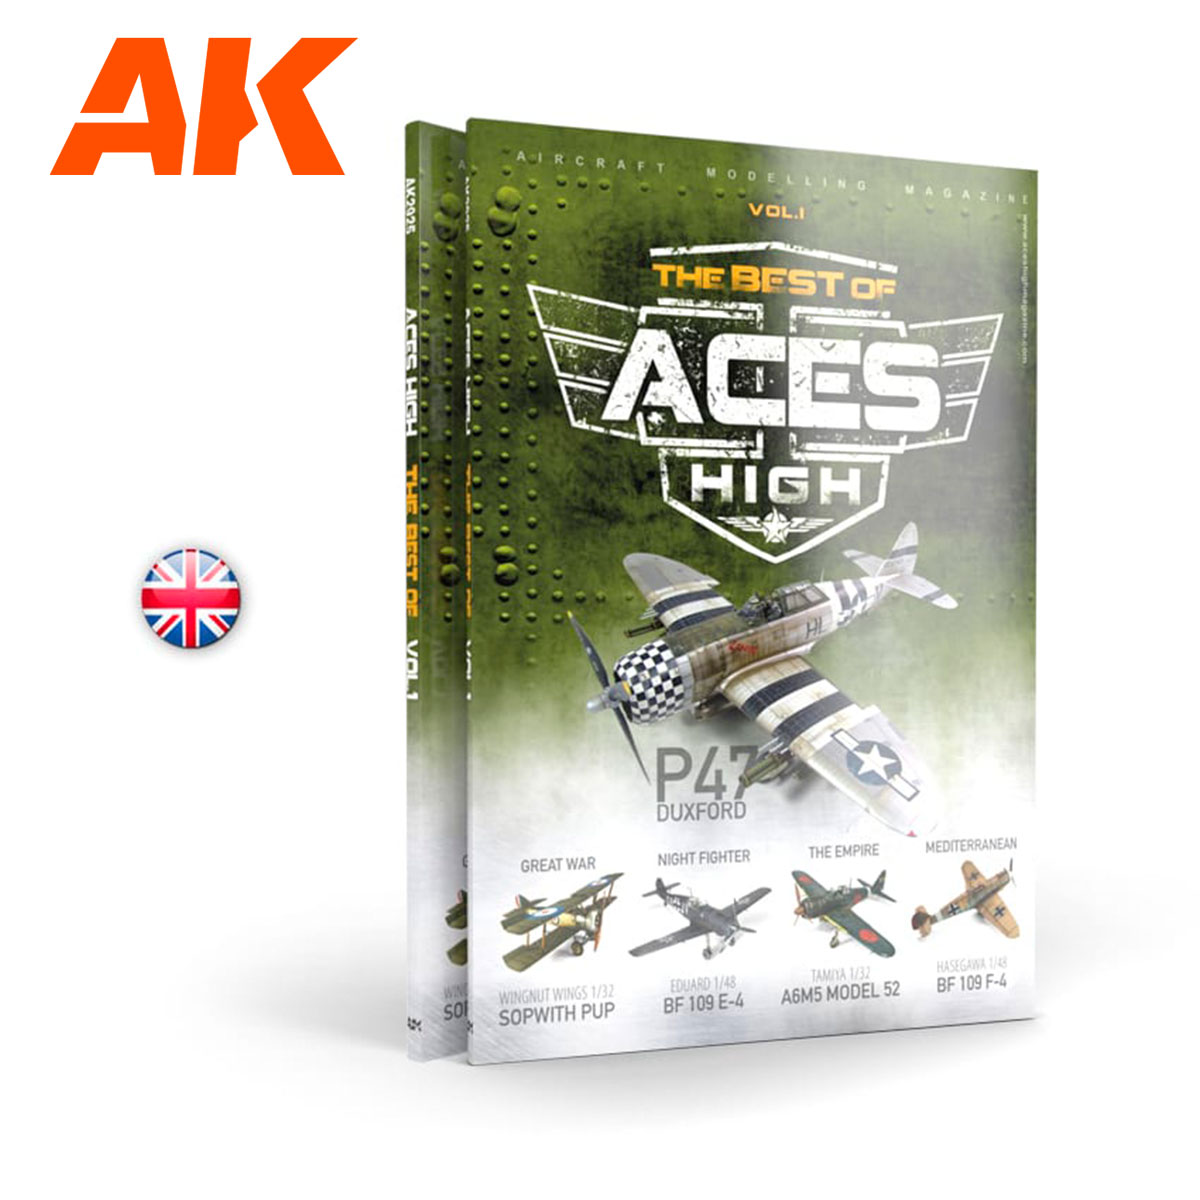 The best of: ACES HIGH MAGAZINE – VOL1